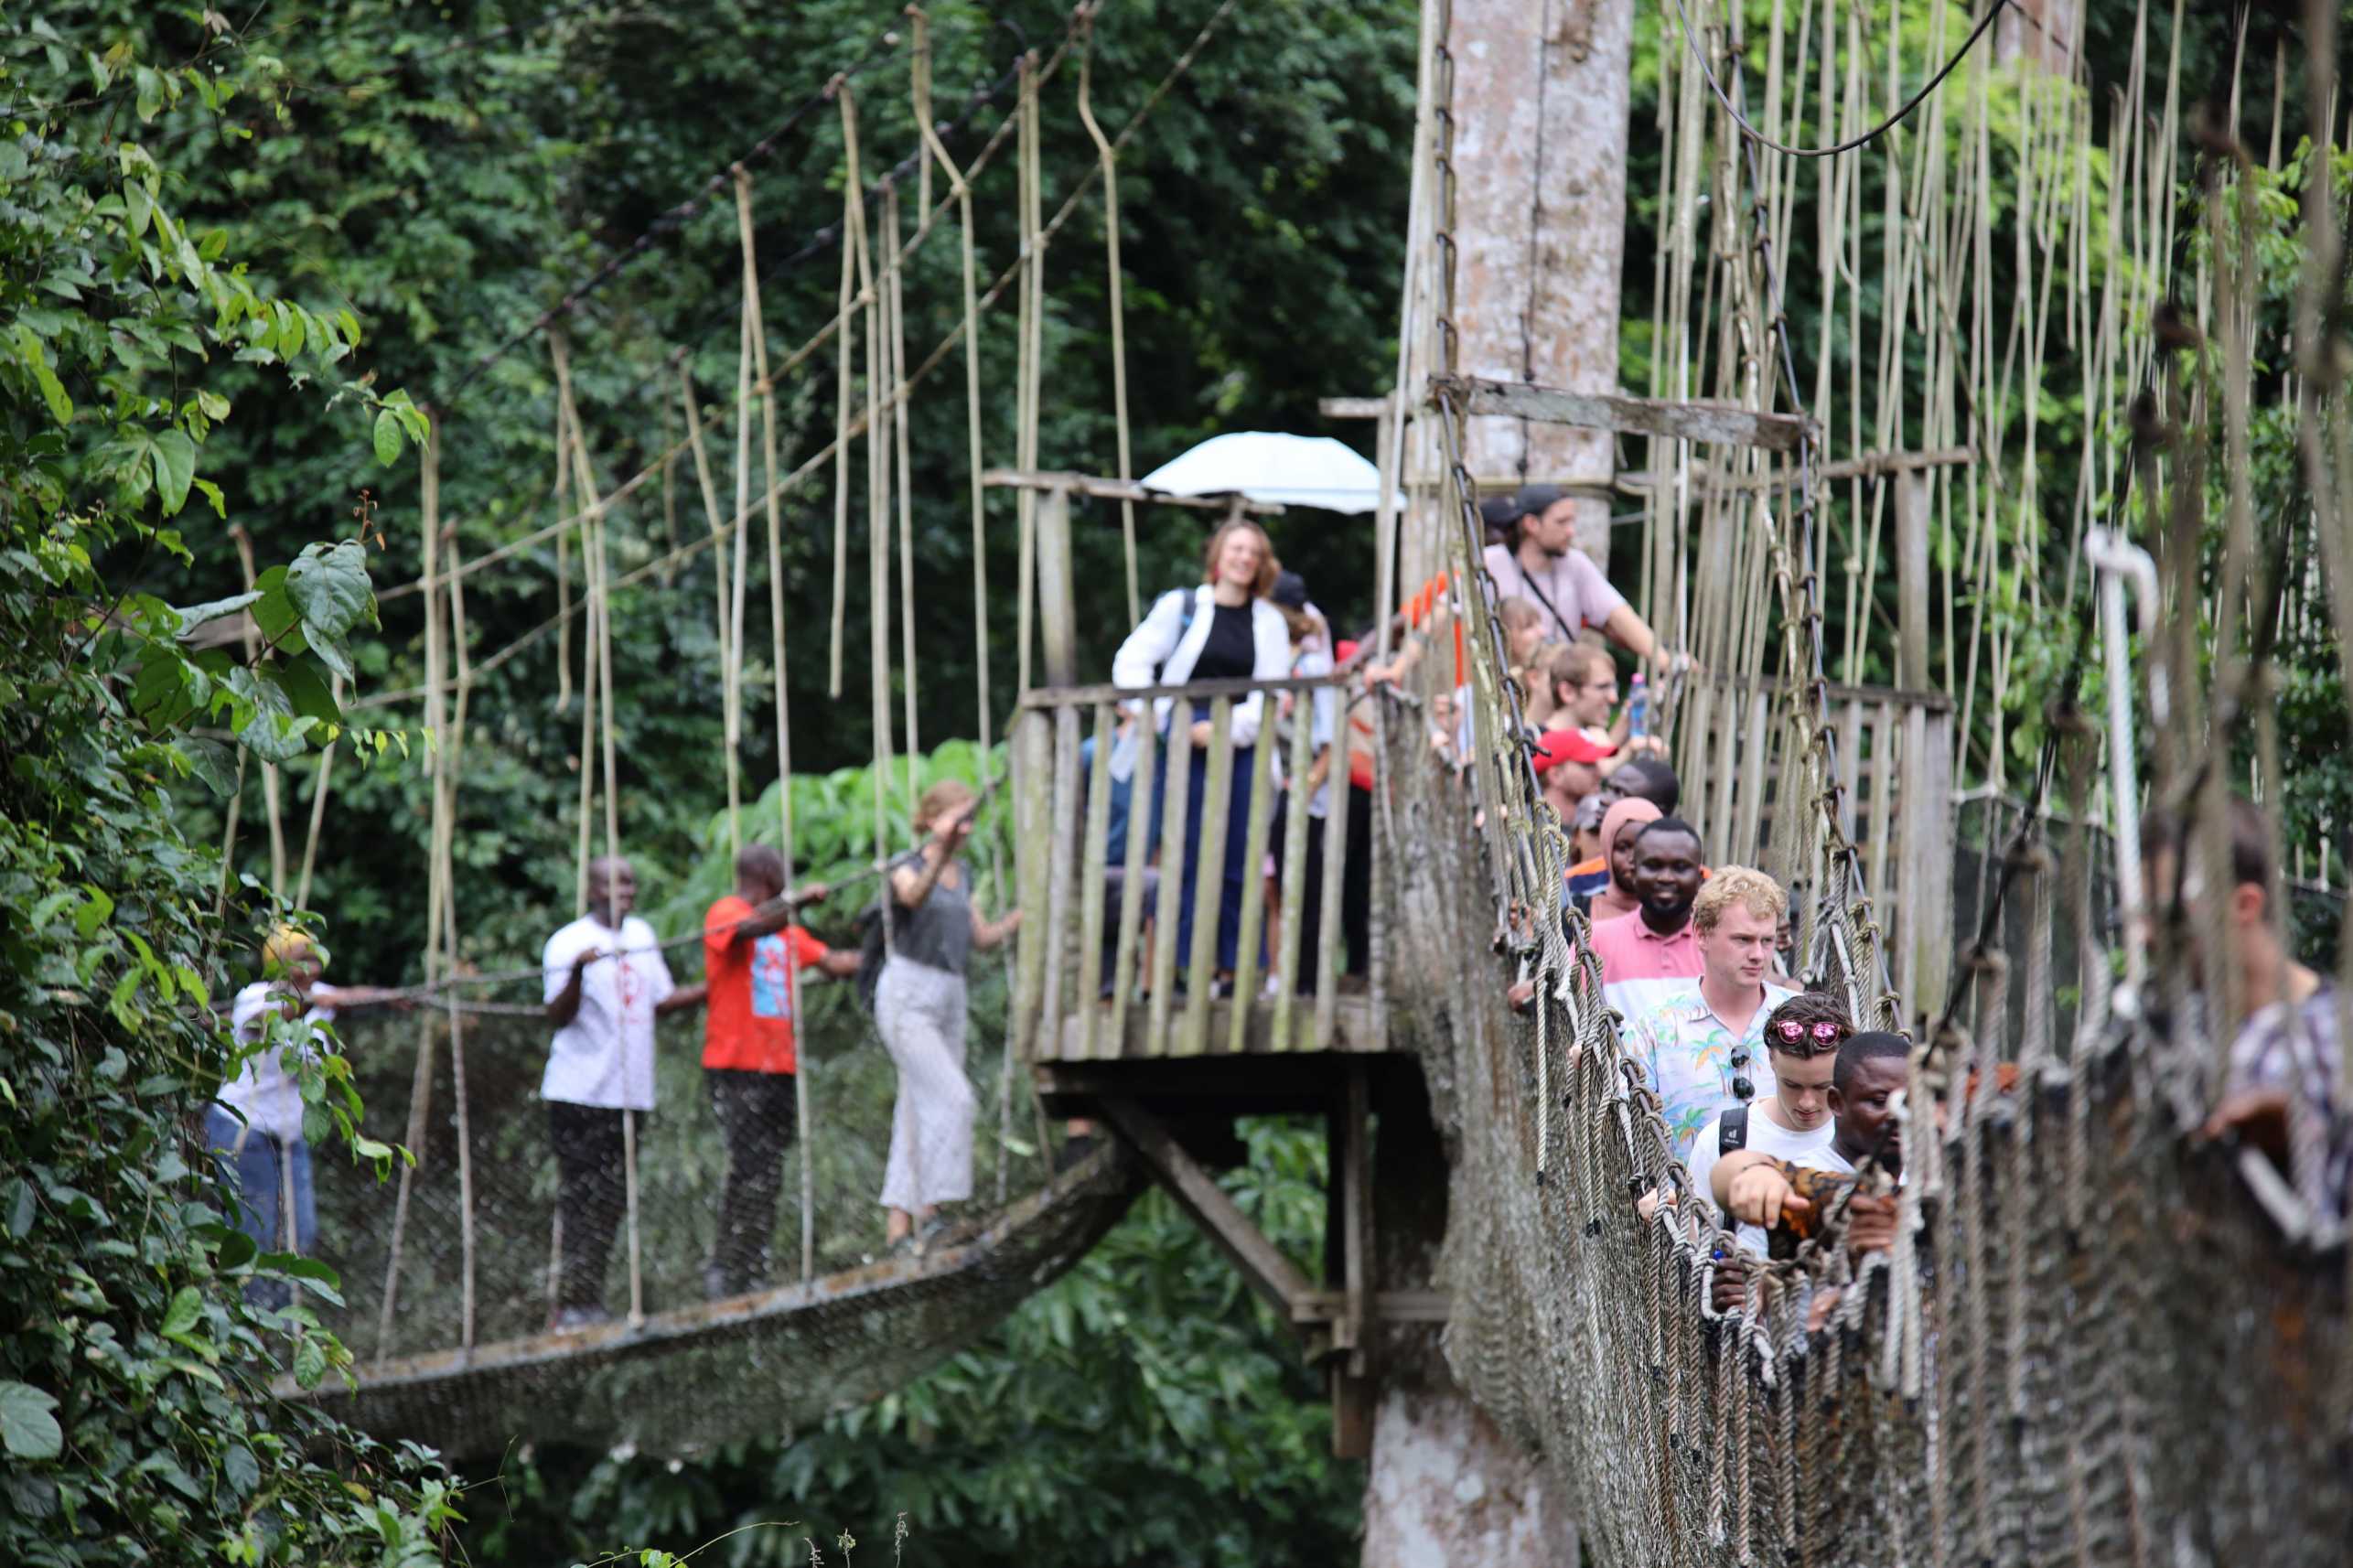 During an excursion to Kakum National Park, the students were able to test their head for heights on a canopy walk.